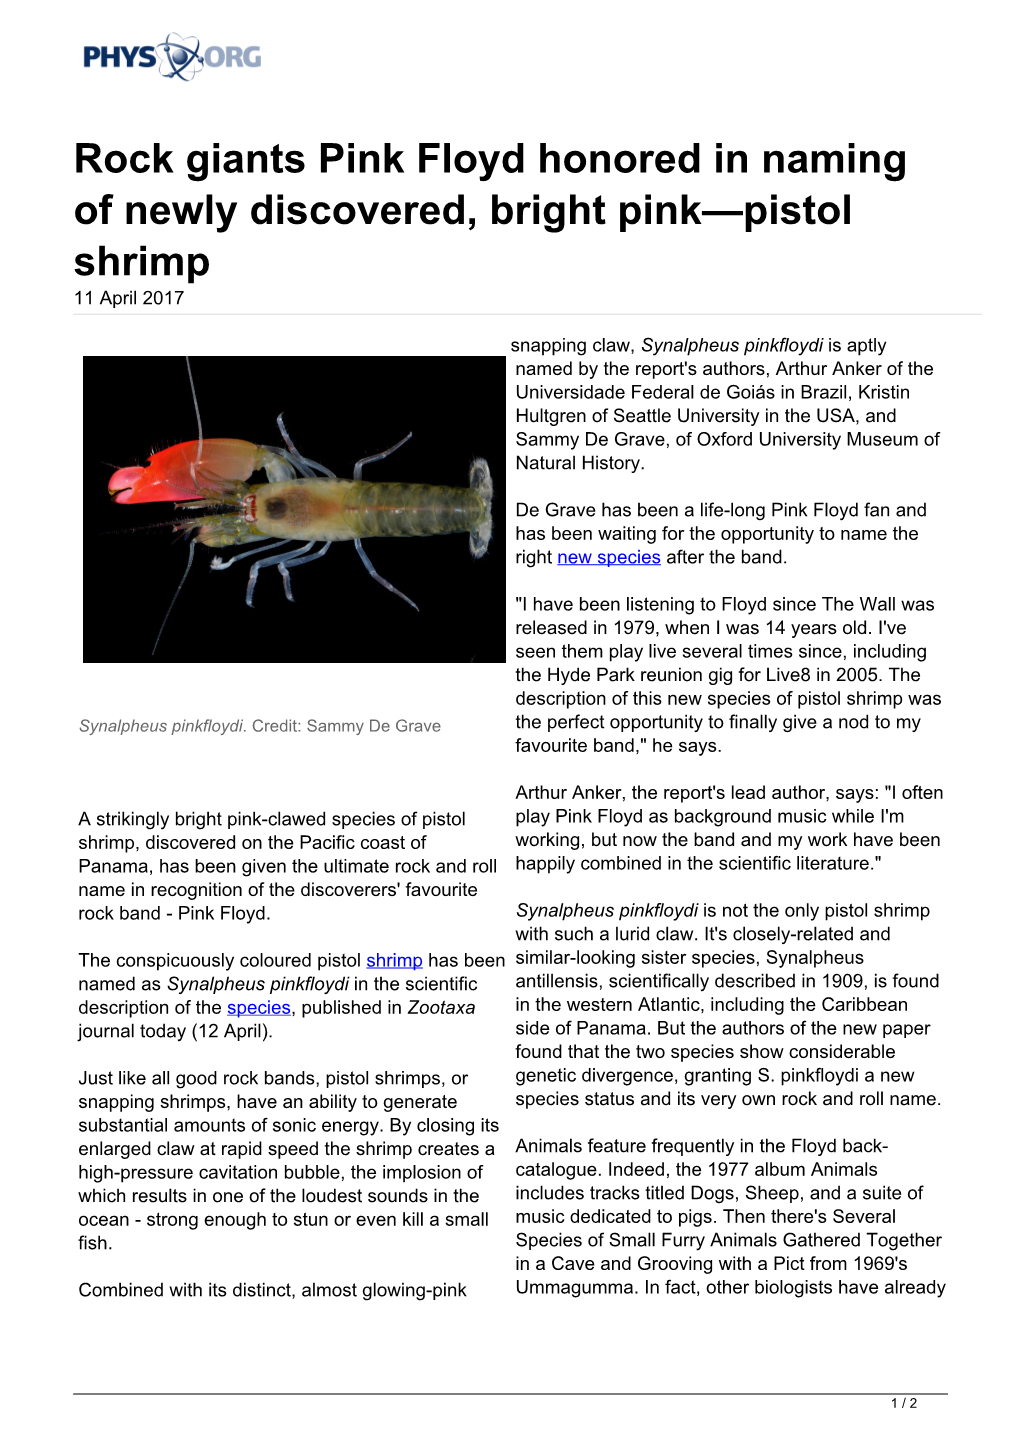 Rock Giants Pink Floyd Honored in Naming of Newly Discovered, Bright Pink—Pistol Shrimp 11 April 2017